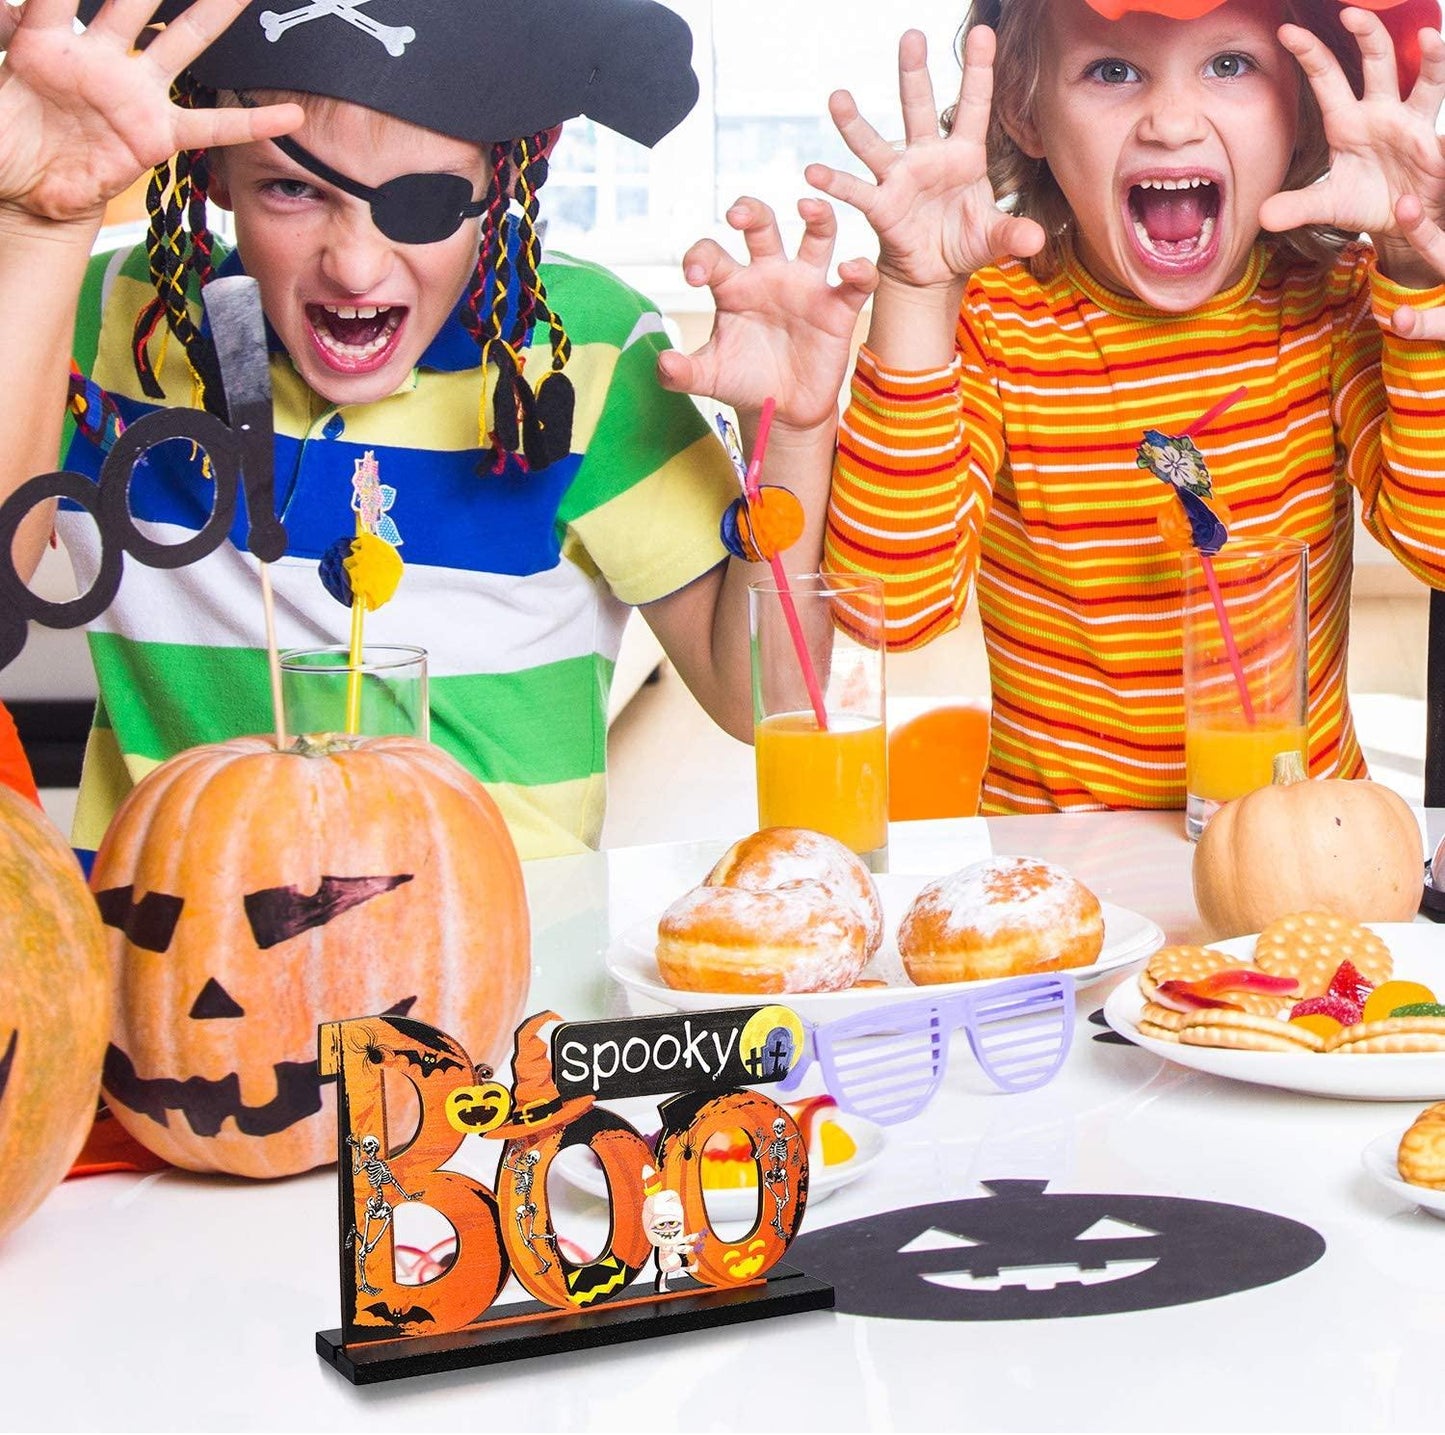 3 Happy Halloween Table Decorations, Pumpkin Table Centerpieces Boo Sign - If you say i do